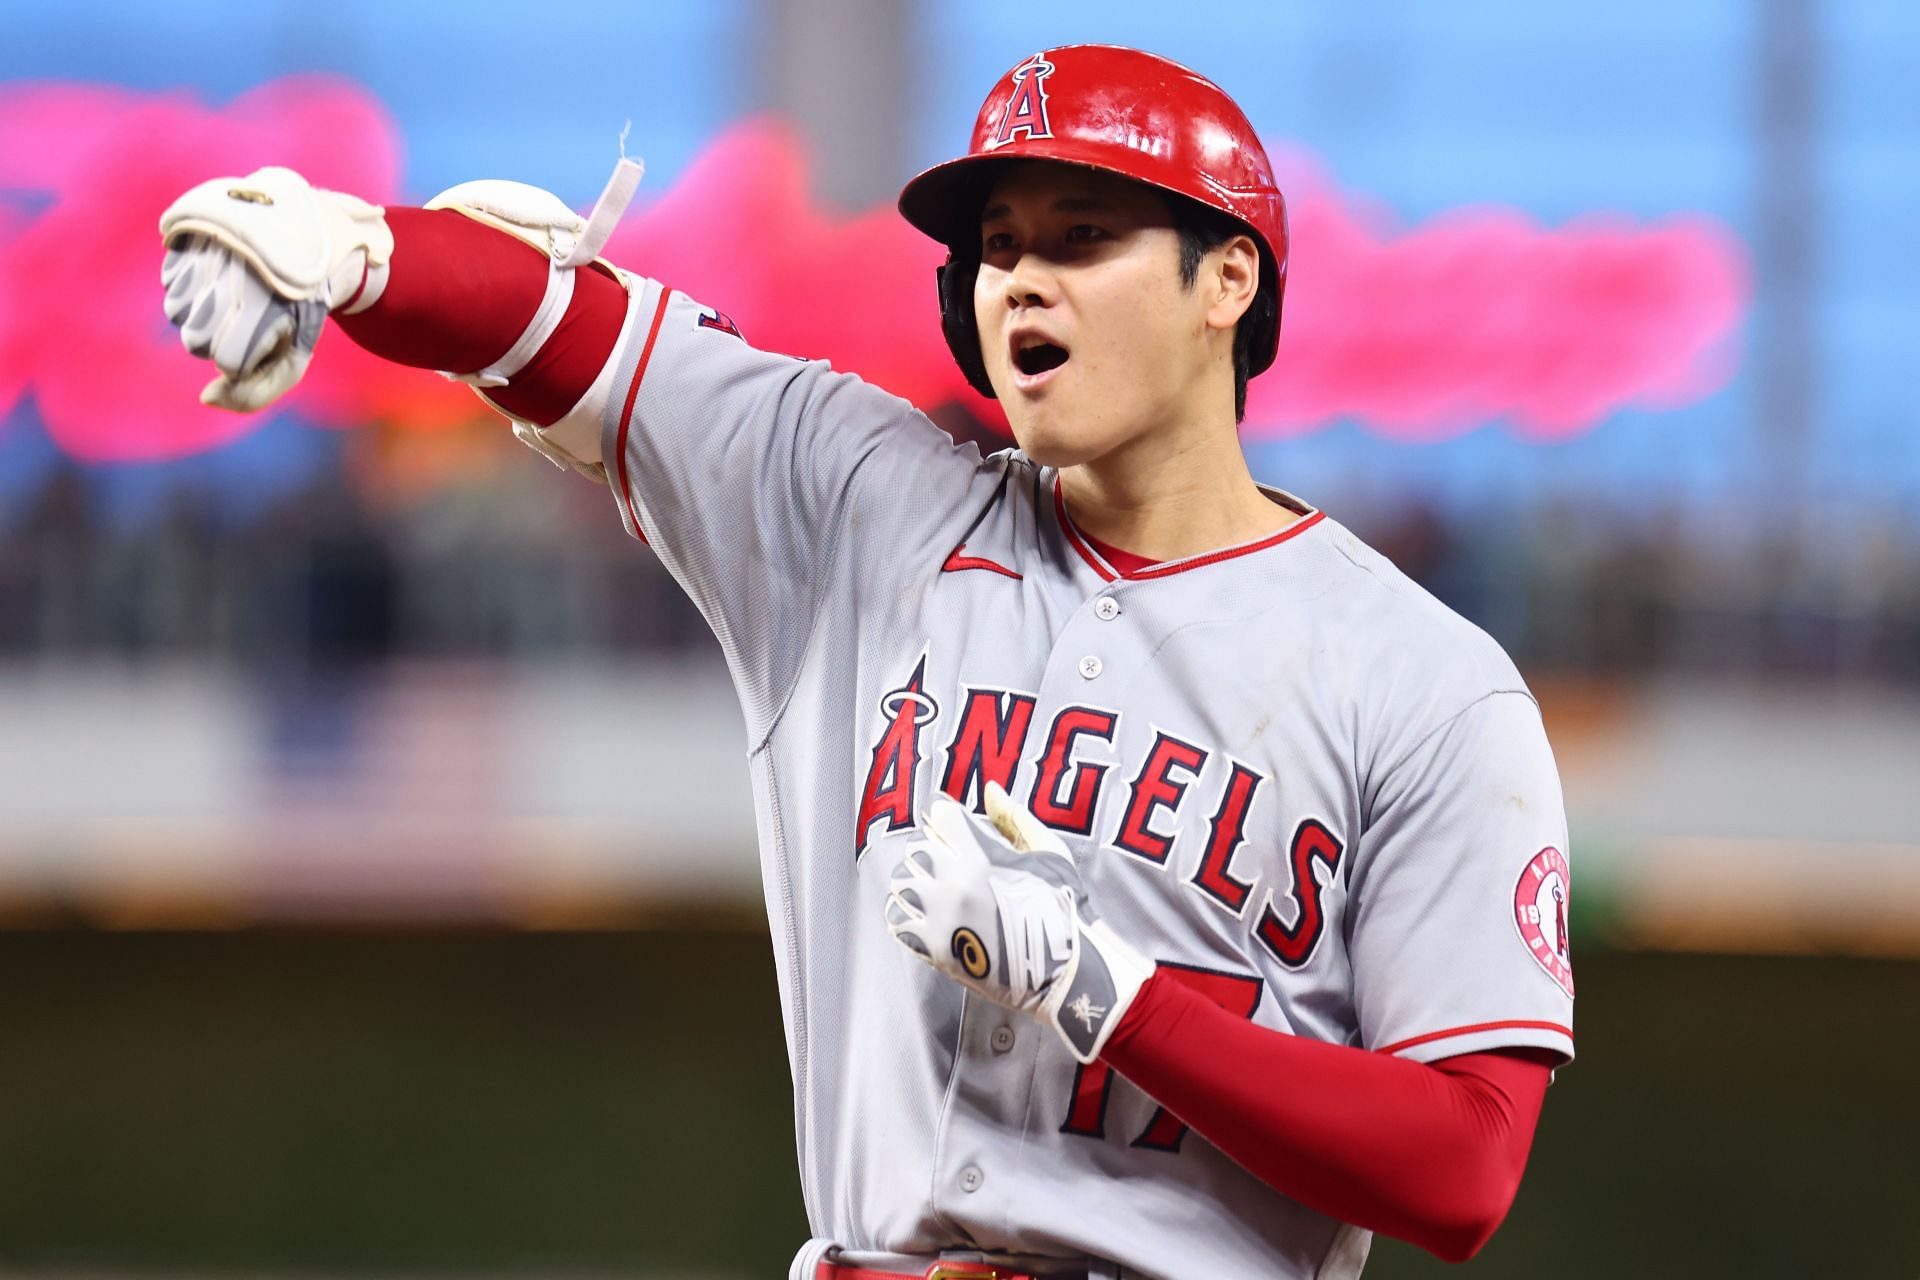 Shohei Ohtani of the Los Angeles Angels celebrates during the fifth inning at loanDepot park